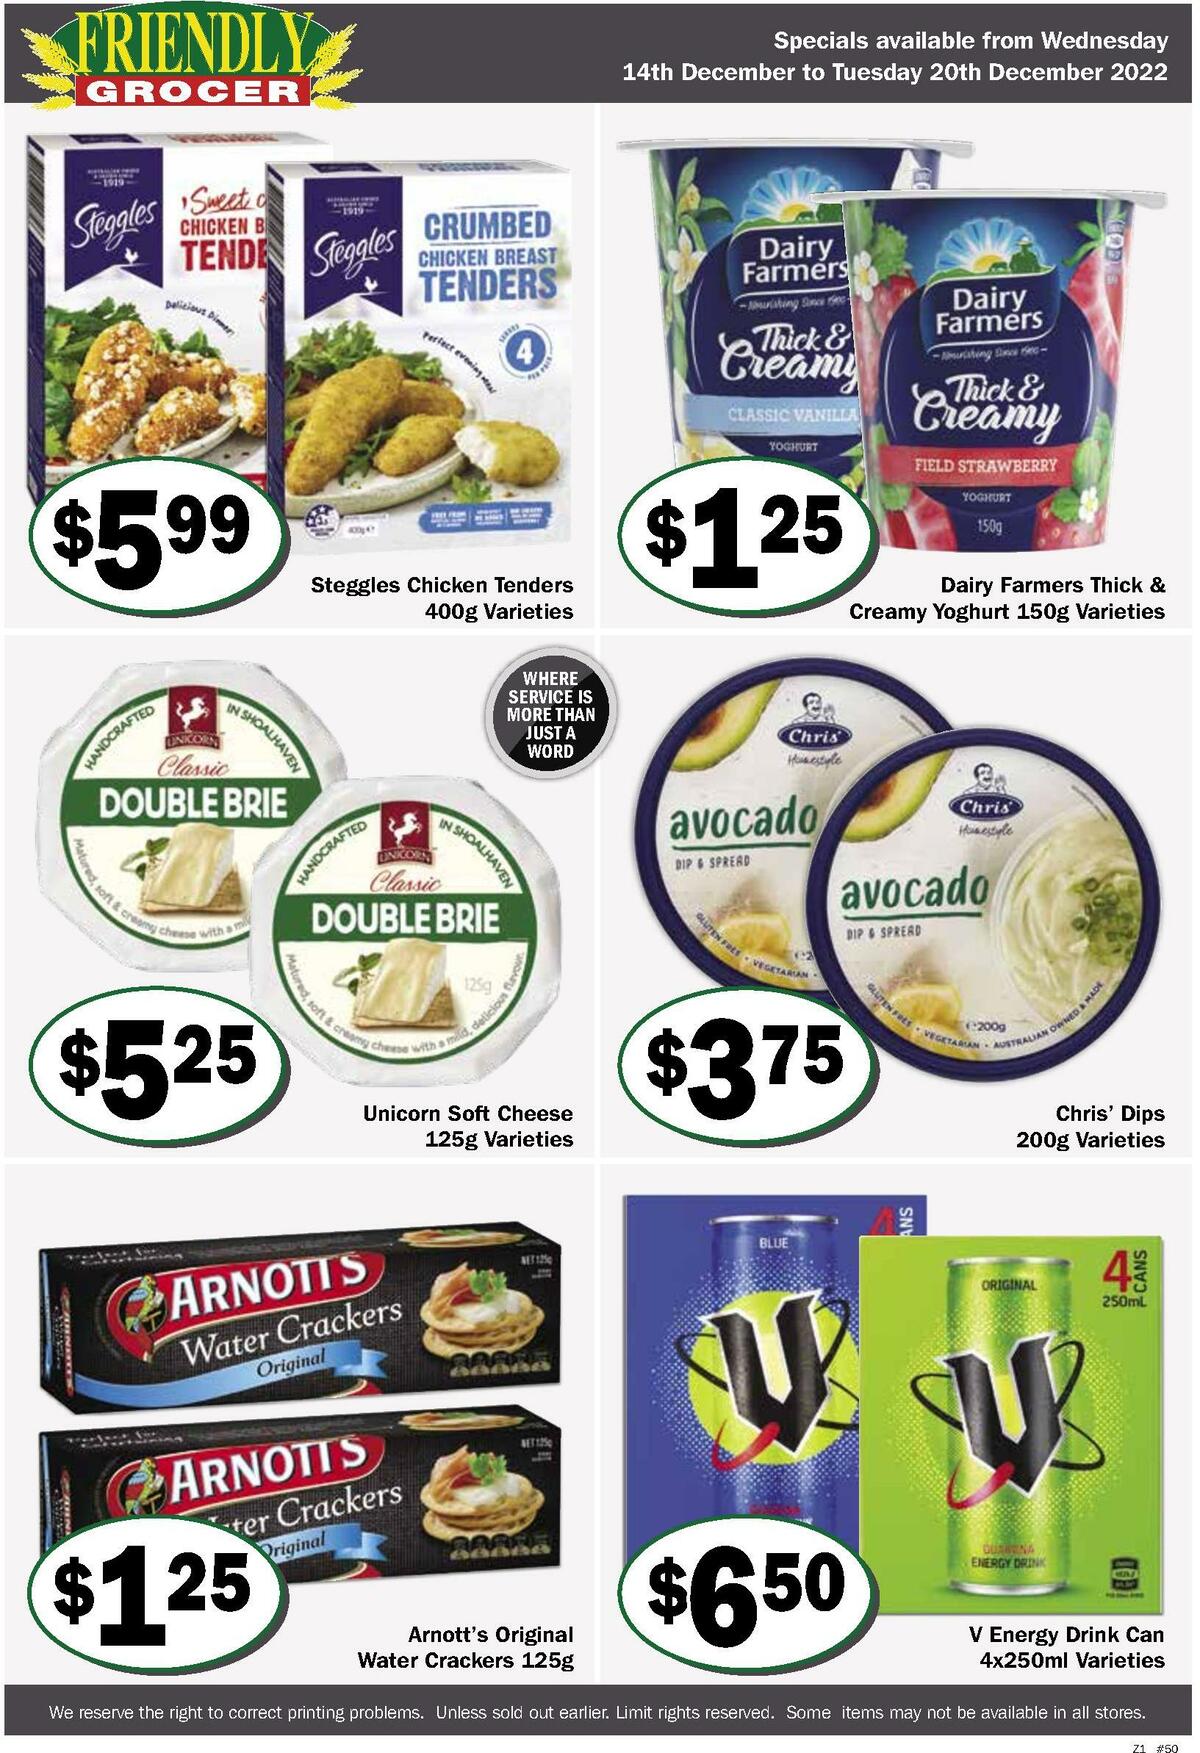 Friendly Grocer Catalogues from 14 December